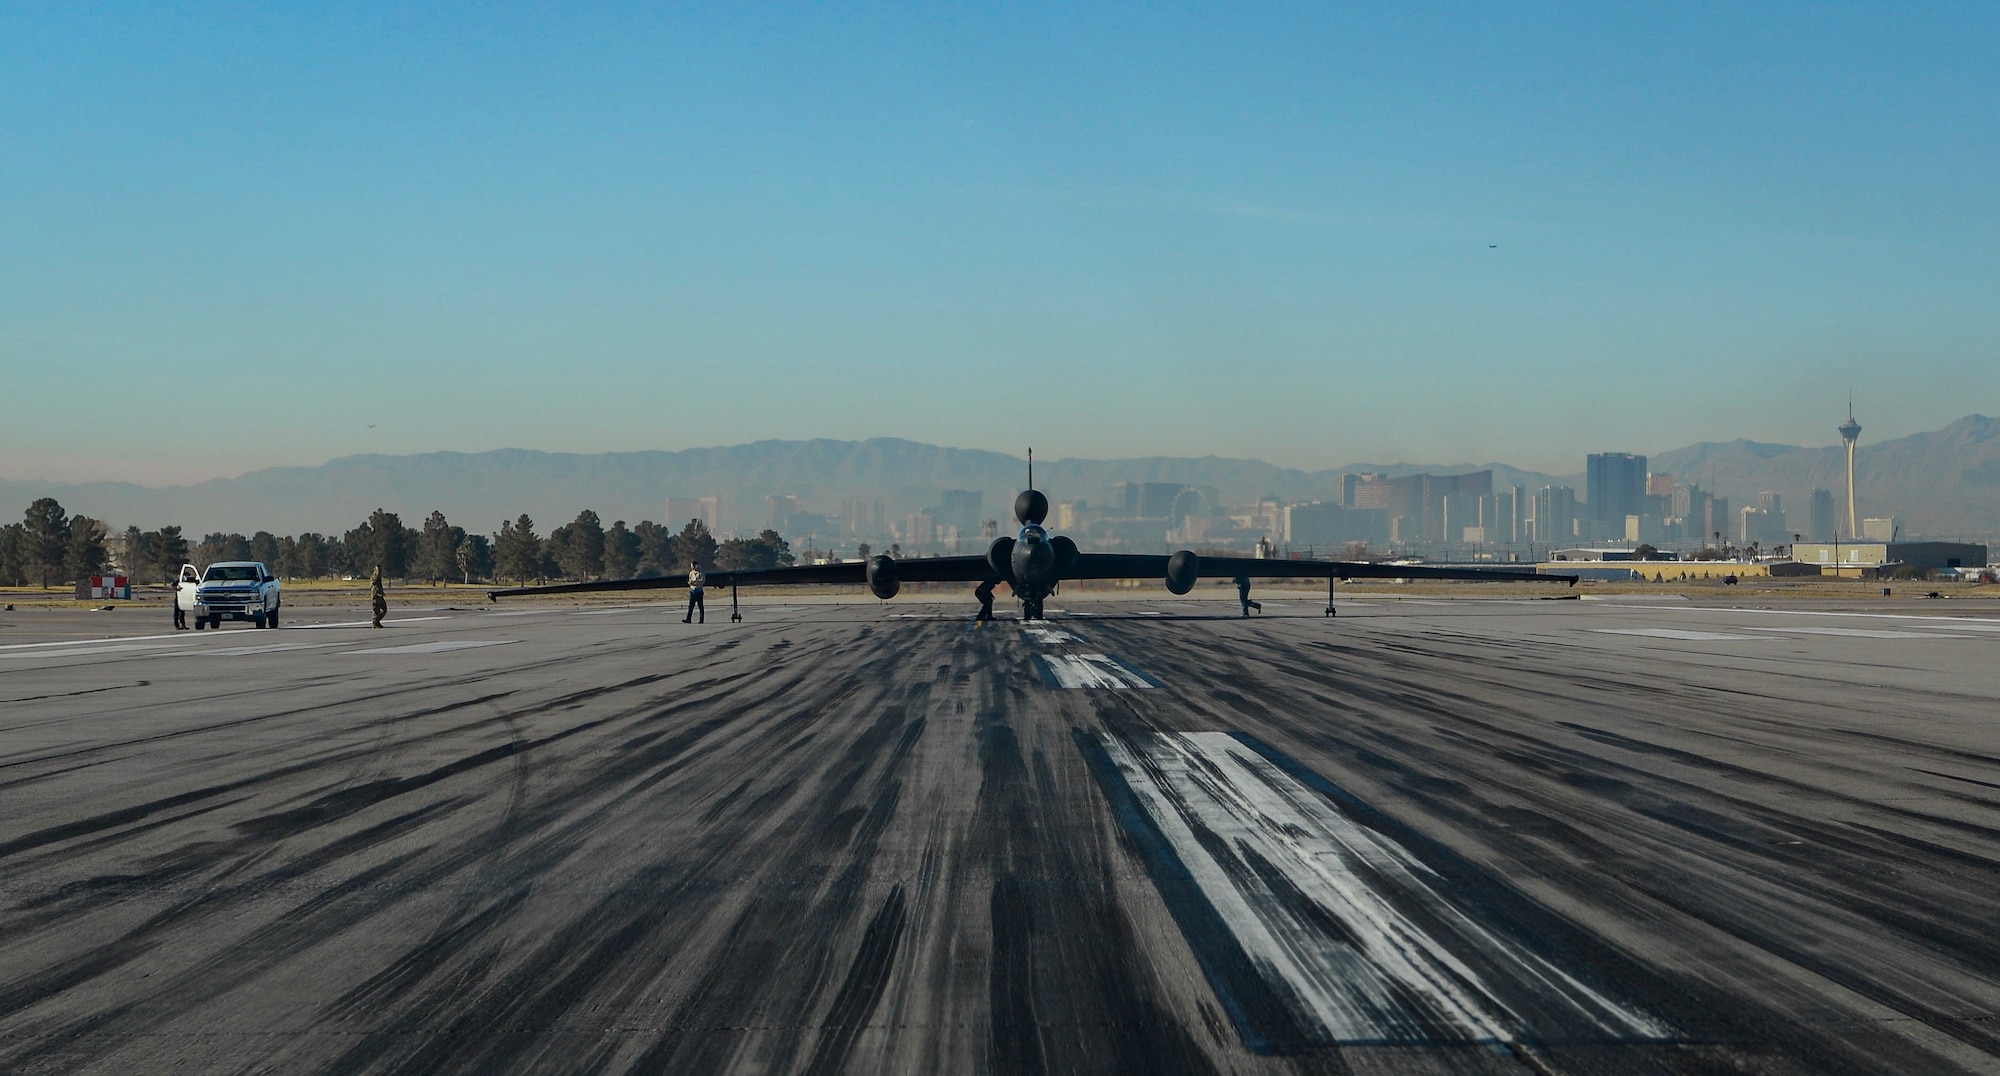 An aircraft sits on the runway before take off.